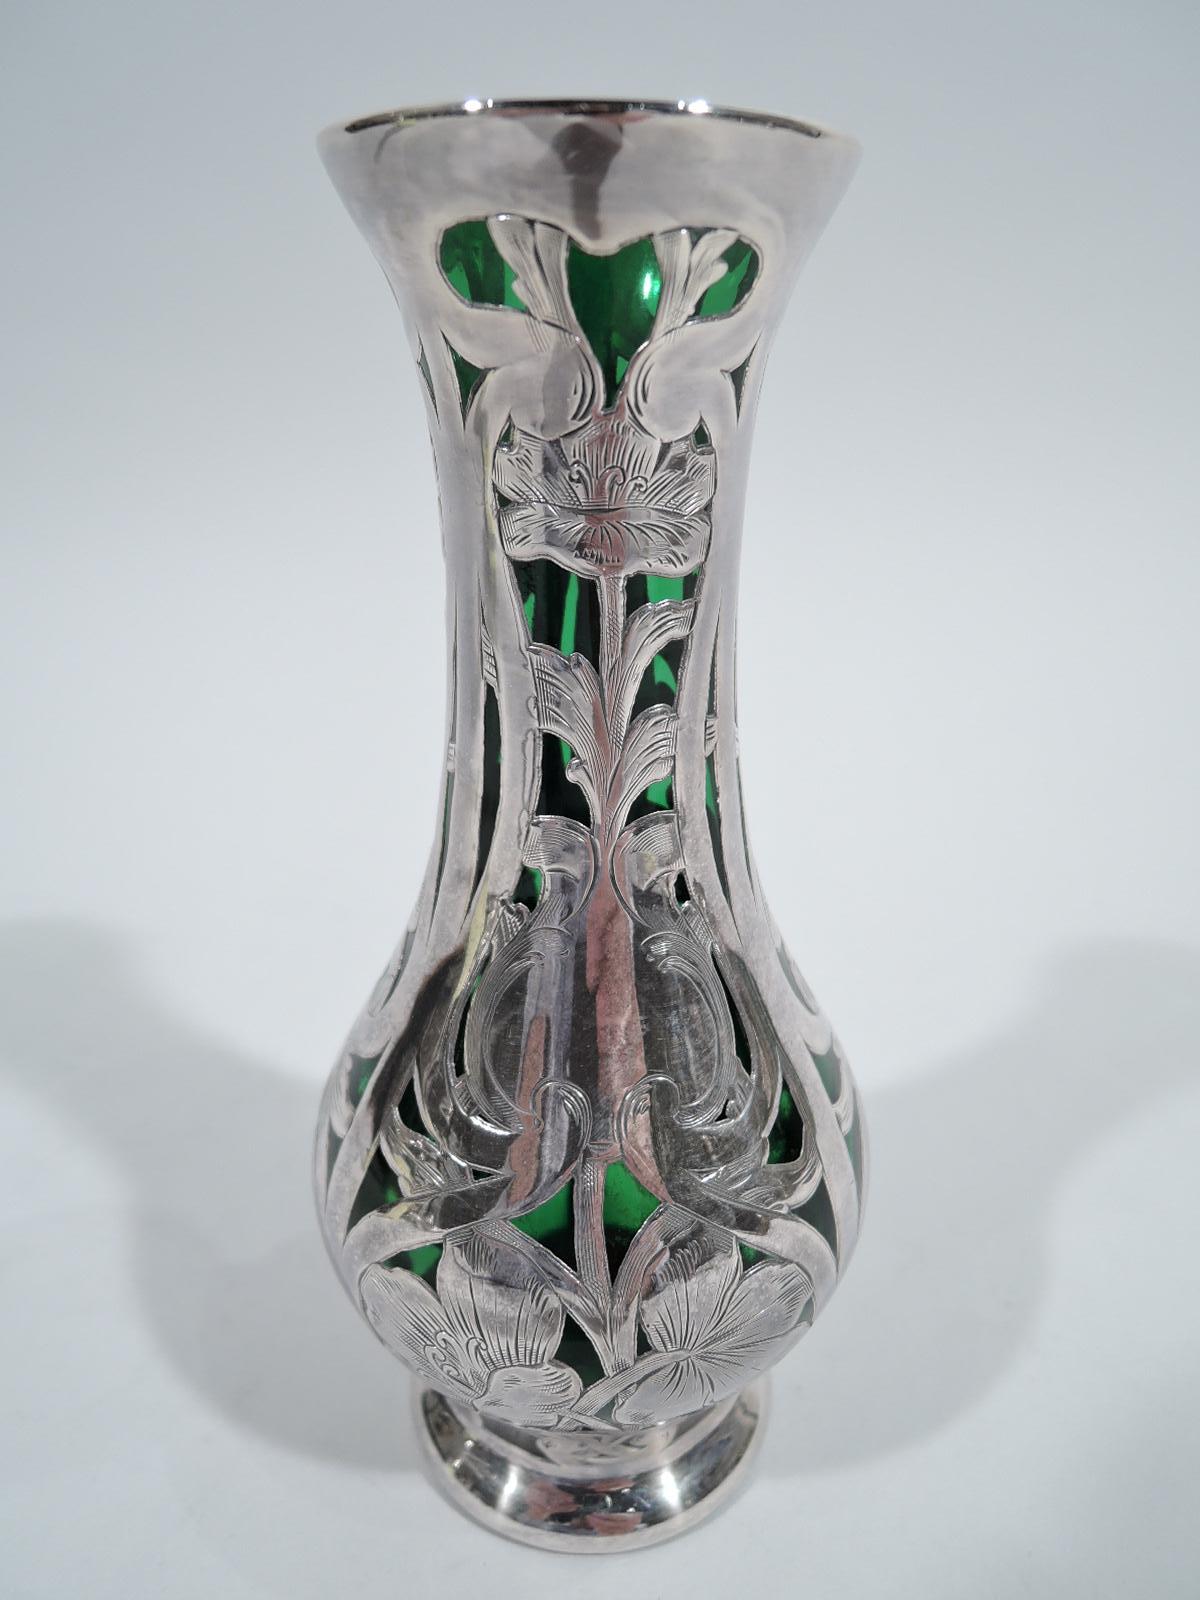 Turn-of-the-century Art Nouveau glass vase with engraved silver overlay. Baluster with dense and vertical overlay in form of entwined stem flowers in curvilinear frames. Scrolled cartouche (vacant). Glass is green. Fully marked including maker's